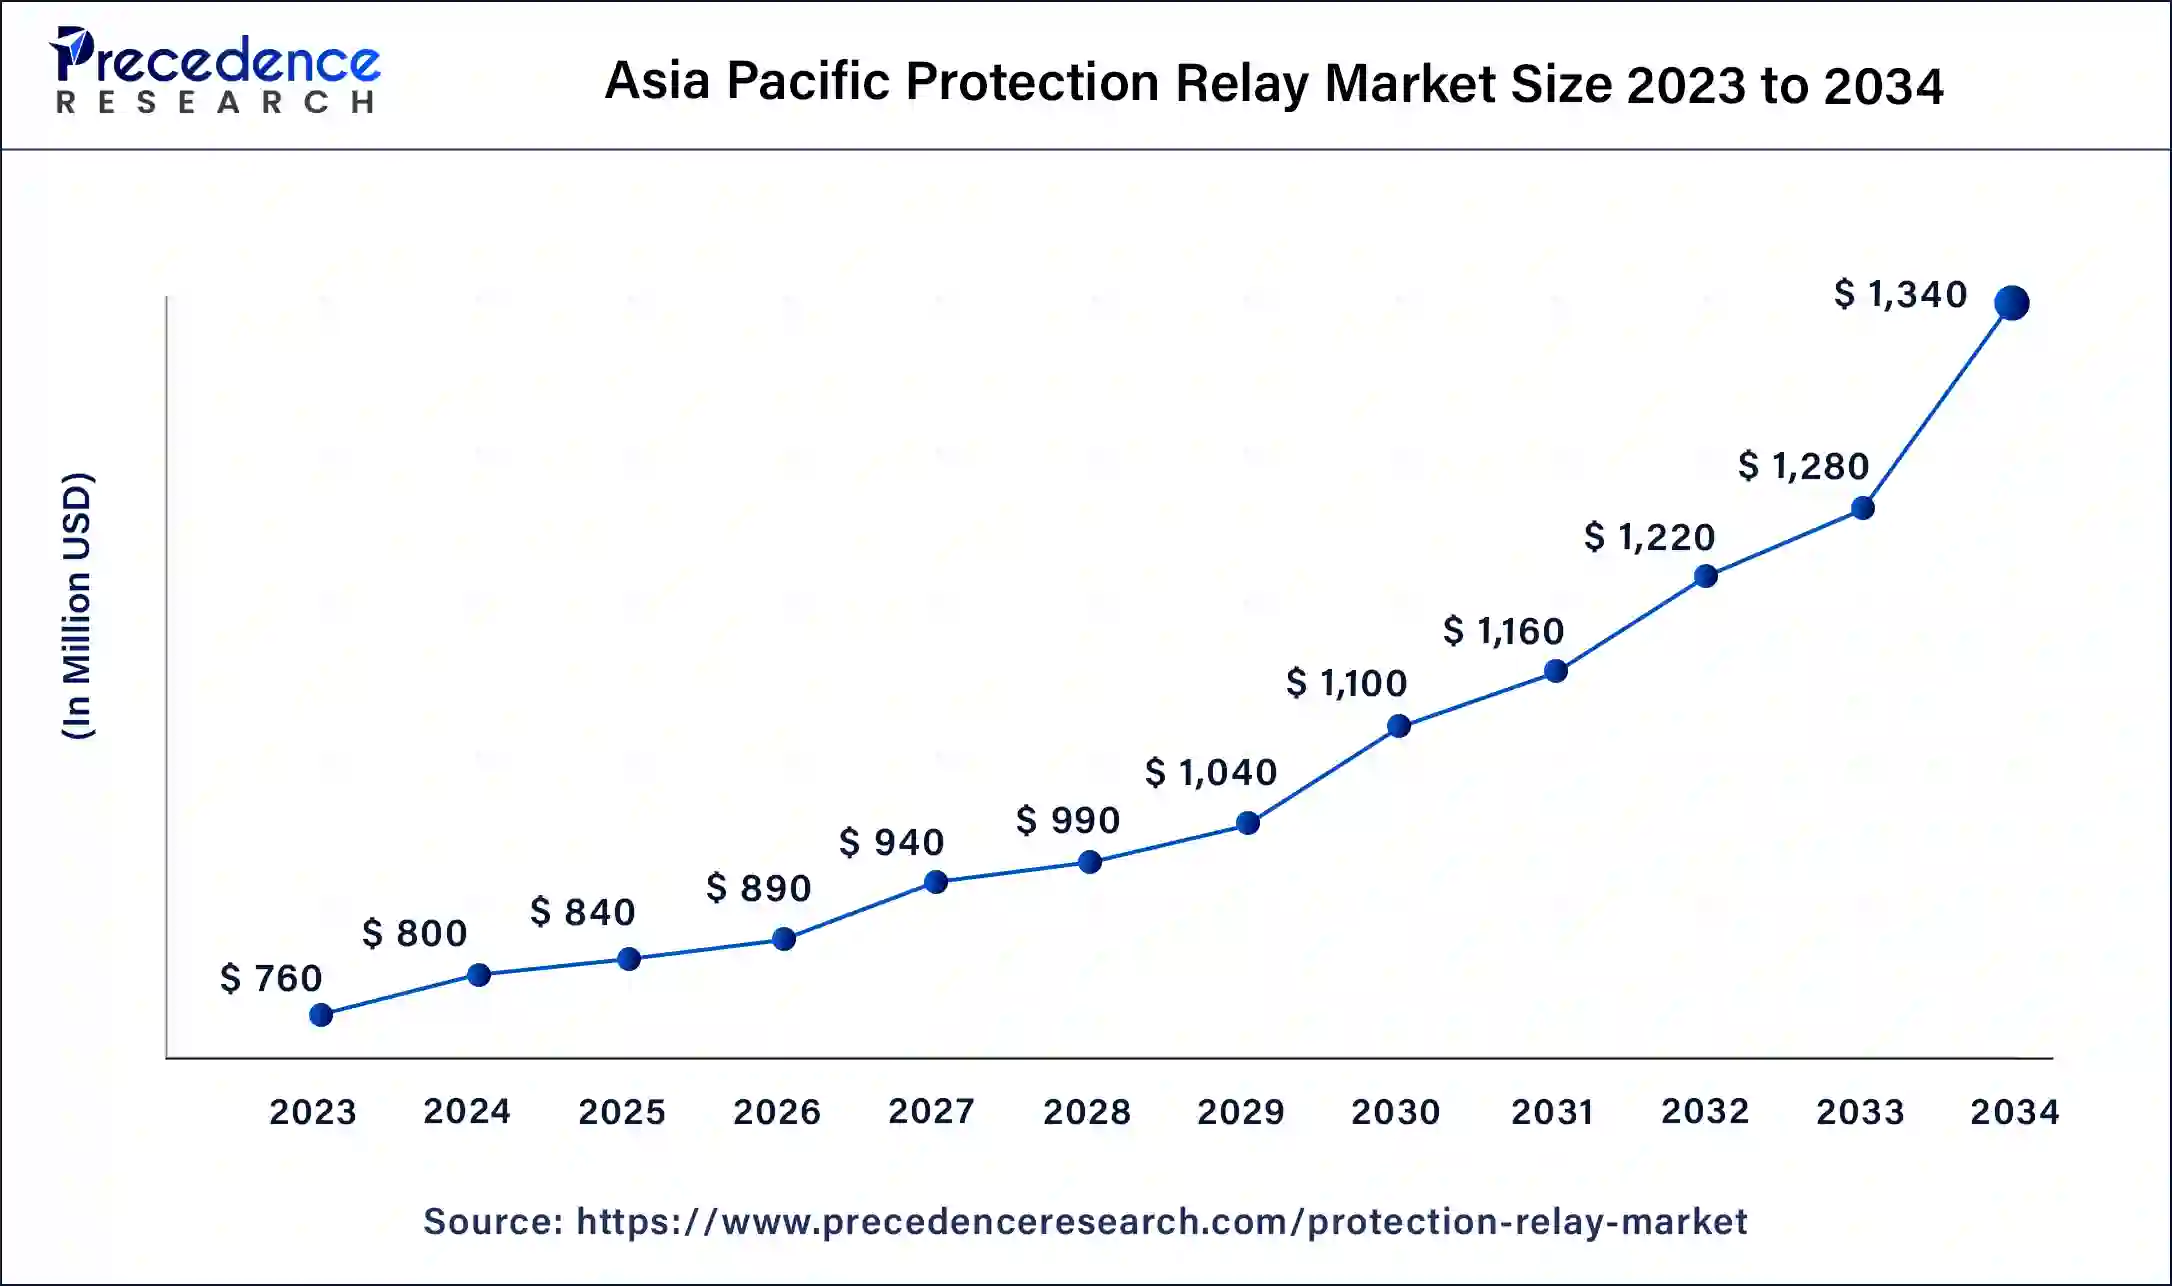 Asia Pacific Protection Relay Market Size 2024 to 2034